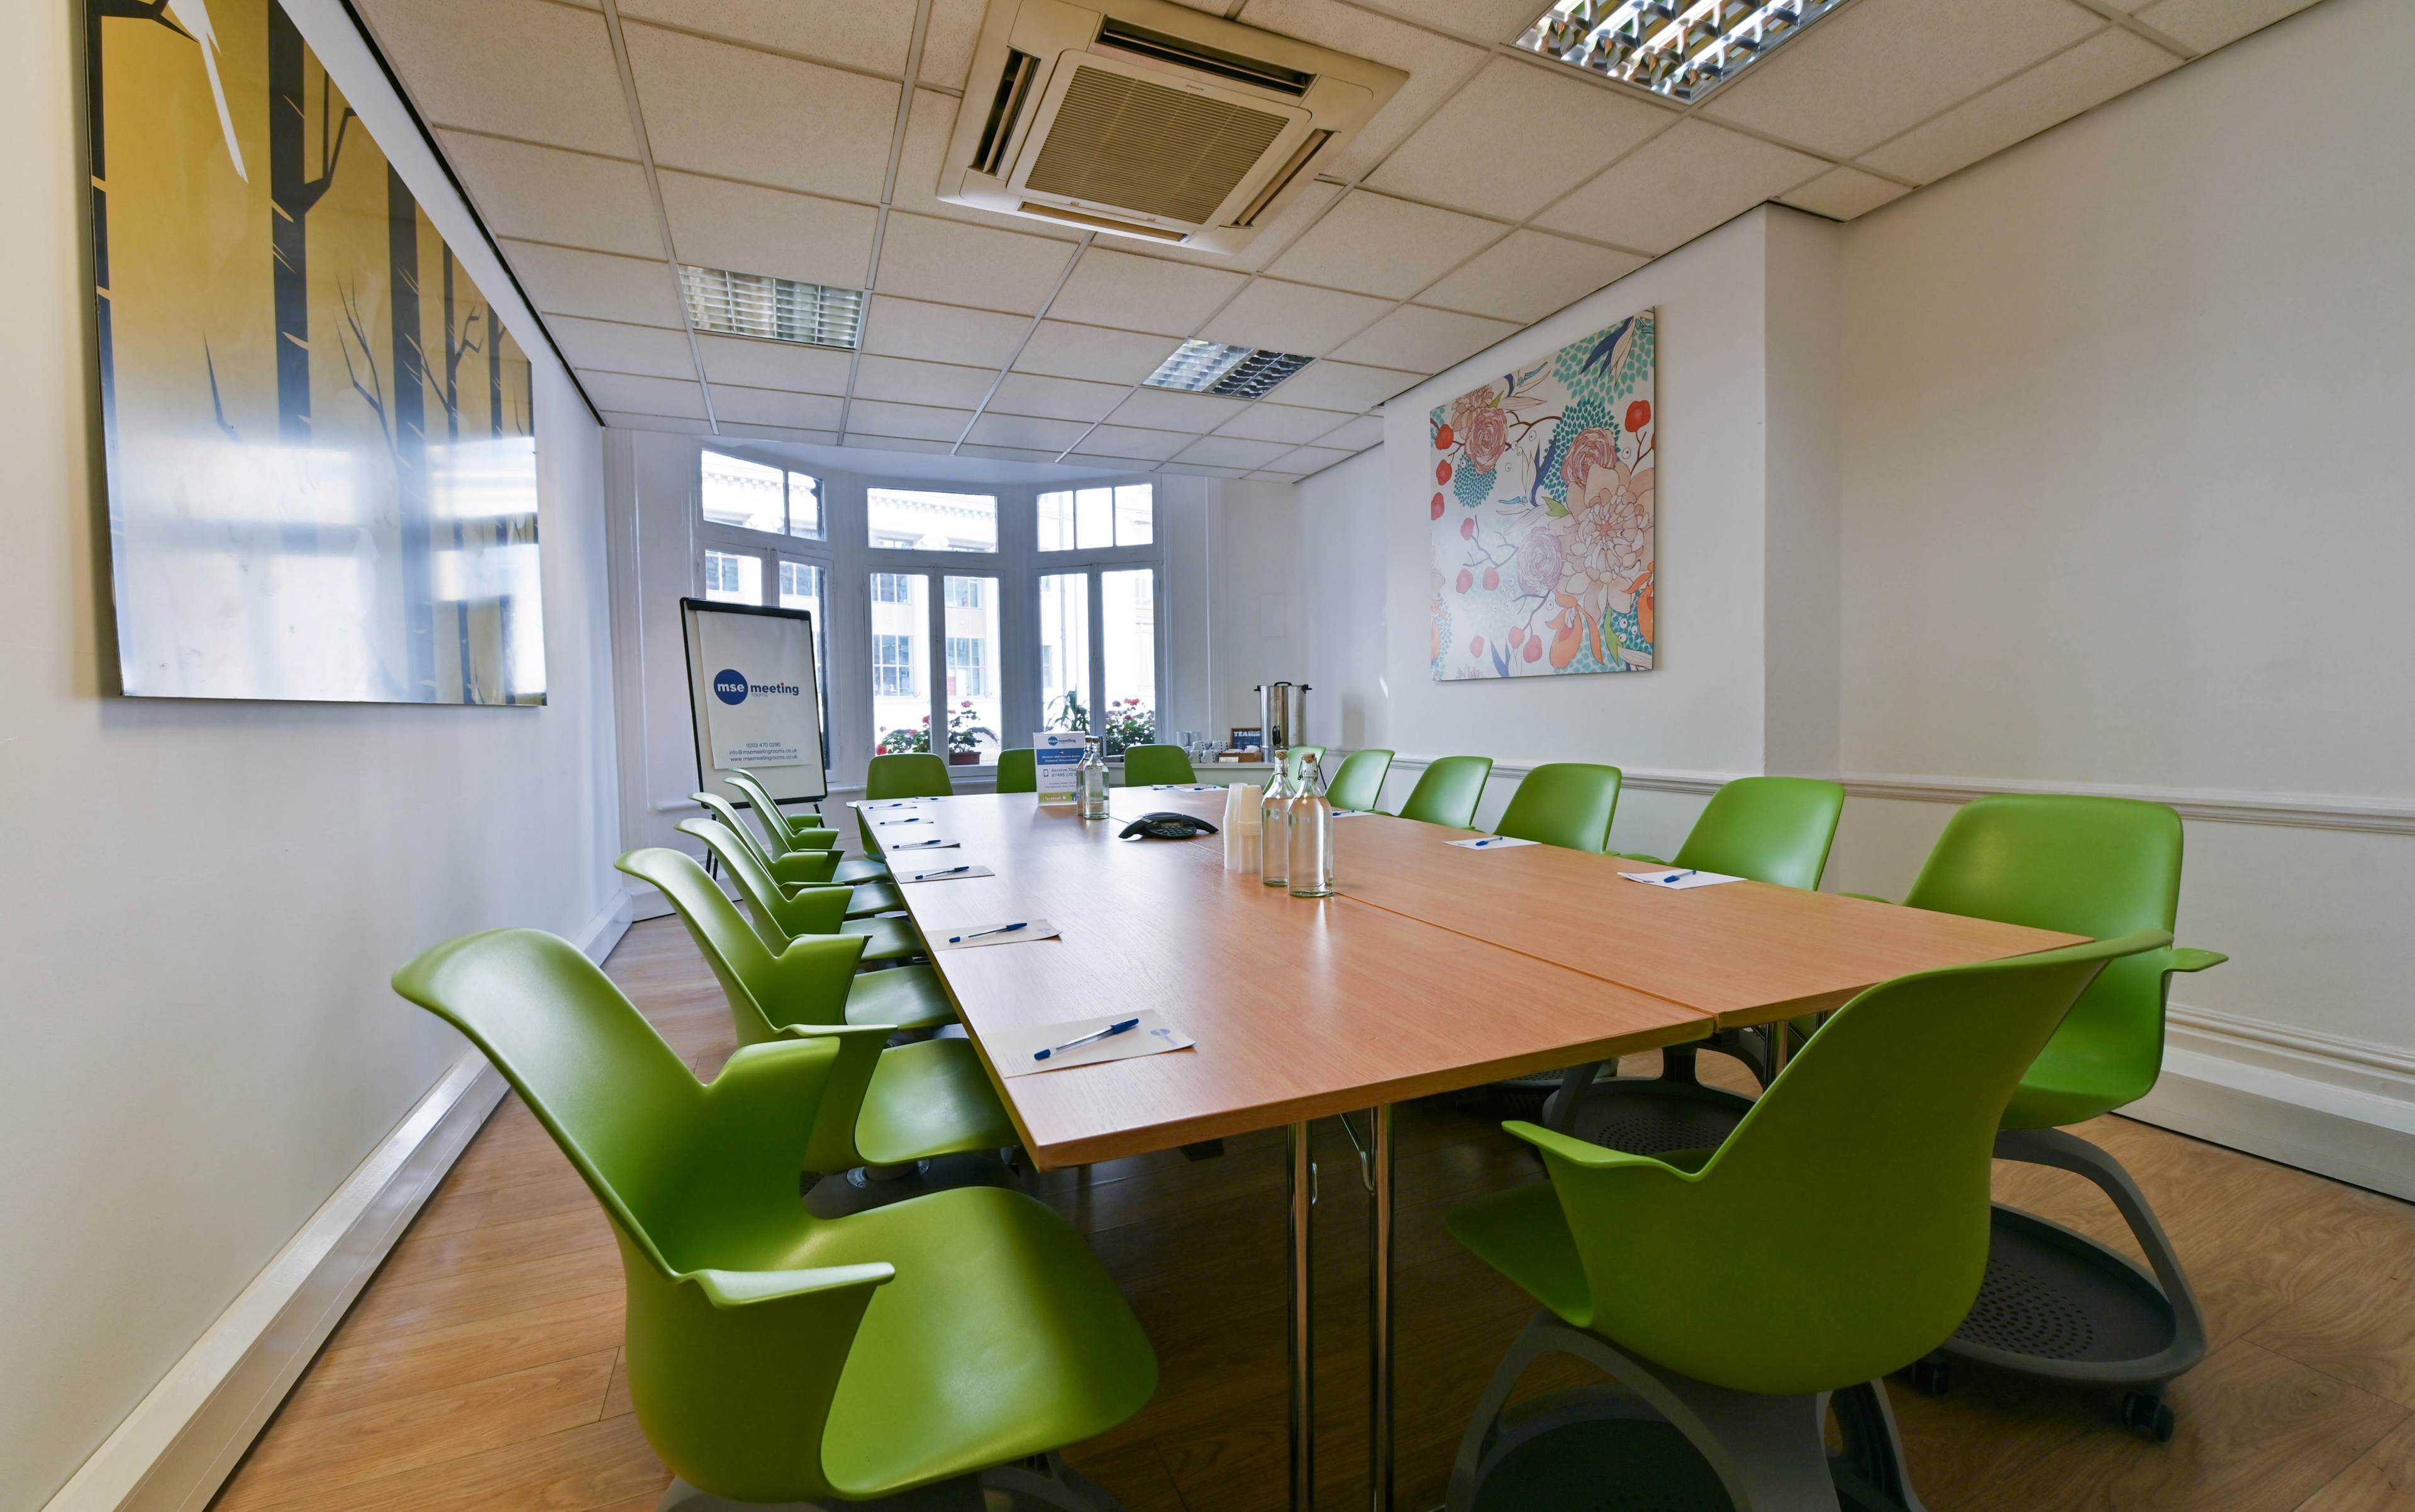 MSE Meeting Rooms - Tottenham Court Road - image 1